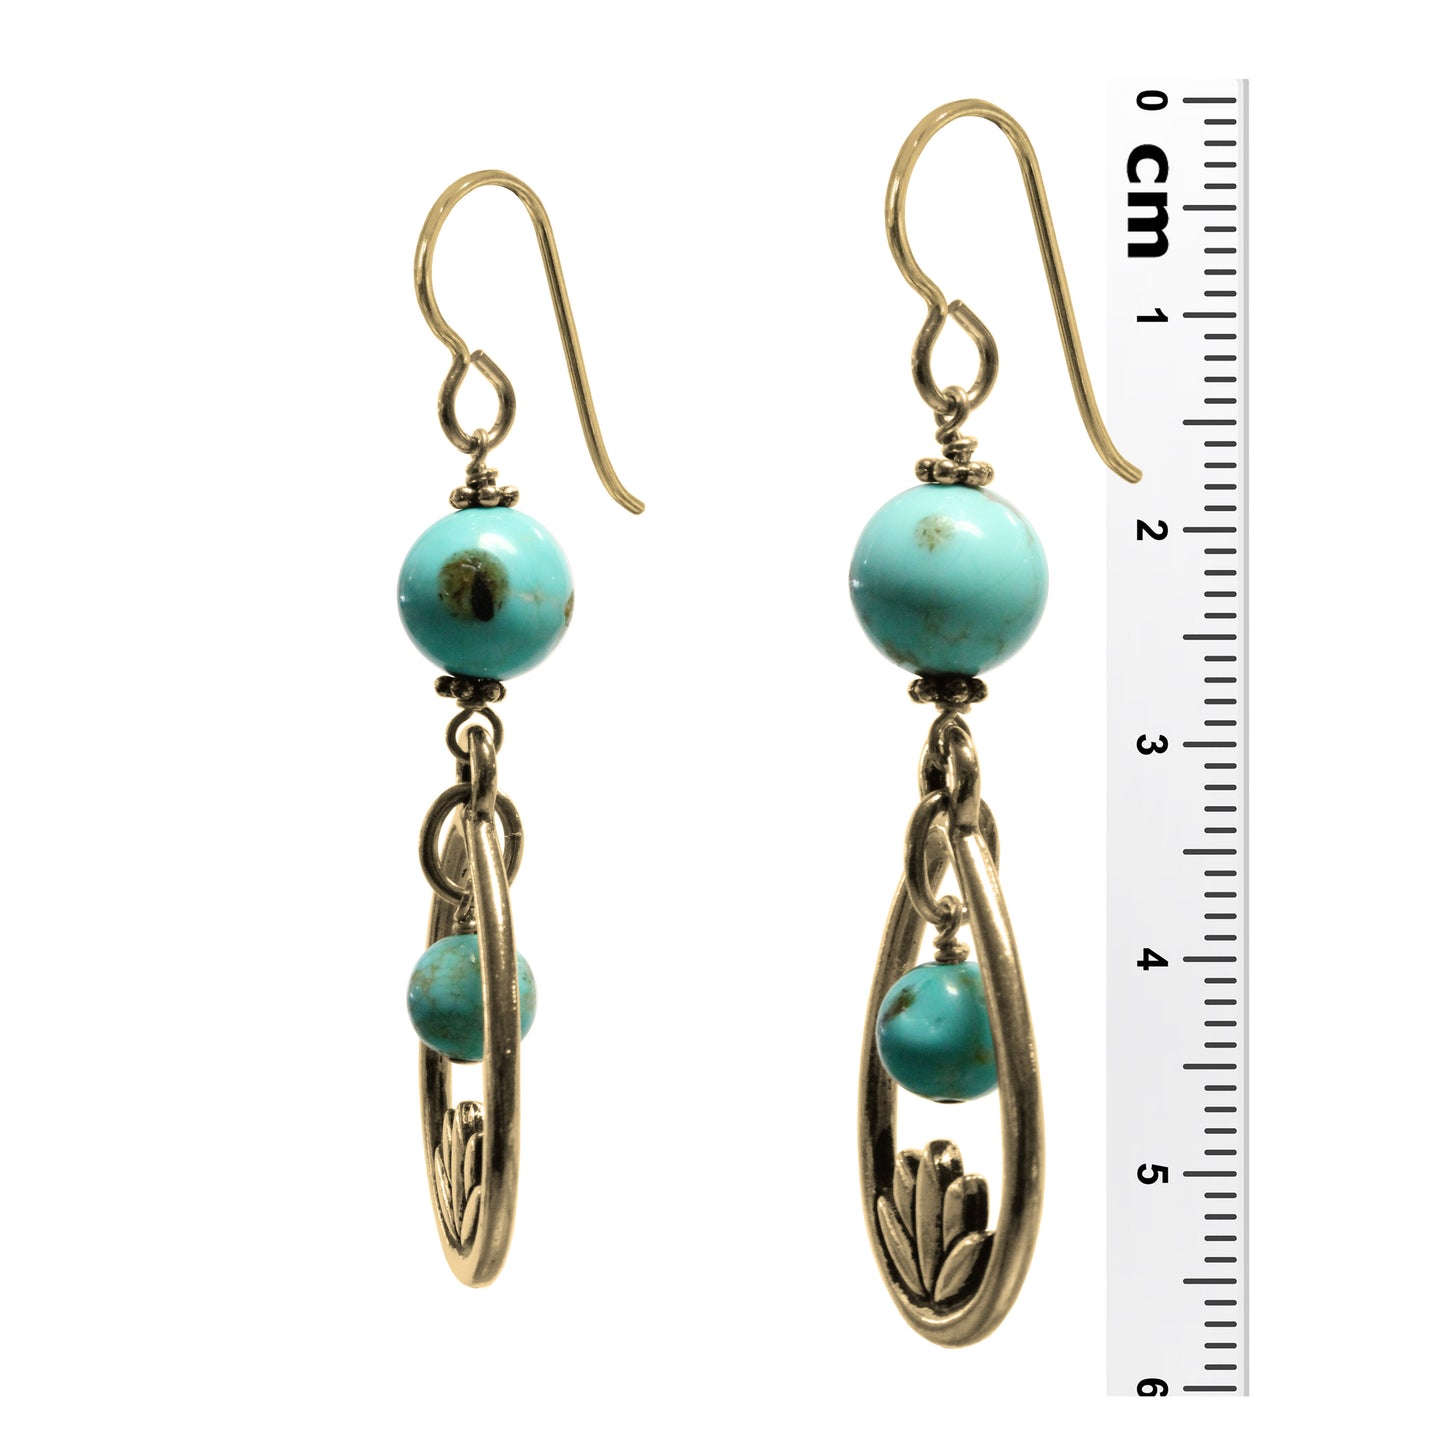 Turquoise Island Lotus Earrings / 58mm length / gold filled hook earwires